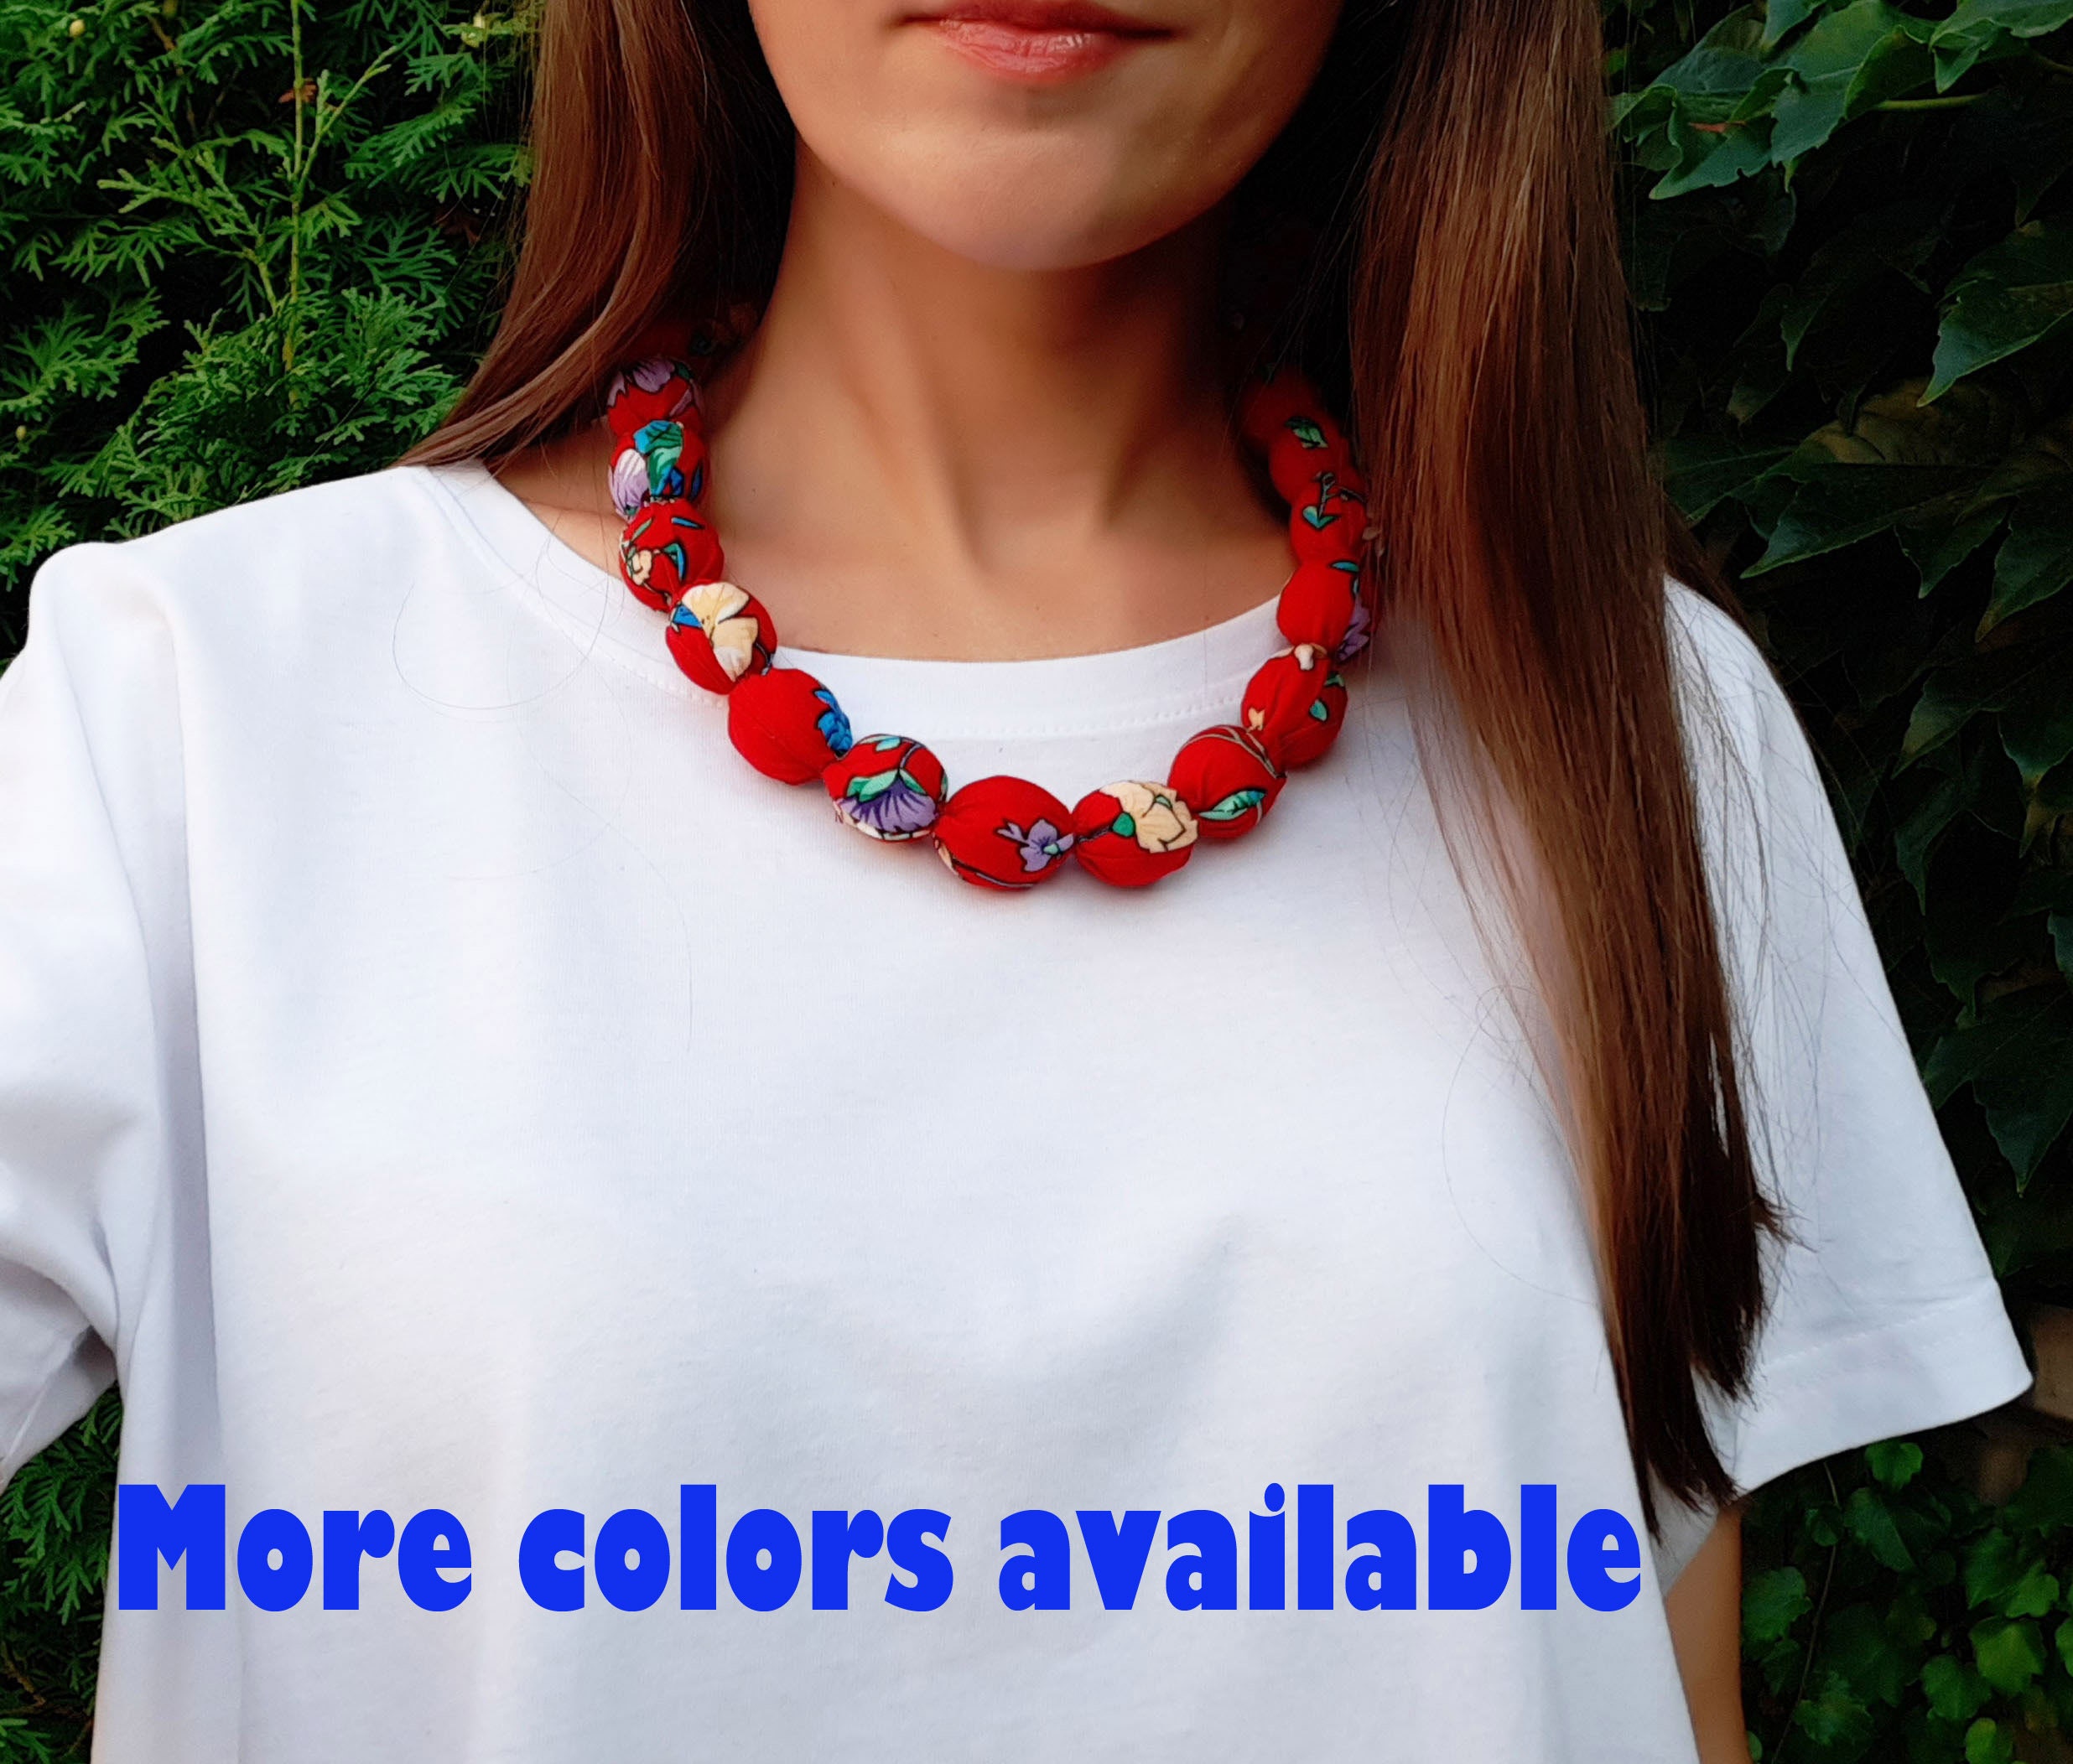 Maxi Large Bead Necklace in Floral and Multicolored Shalimar Cotton Fabric  